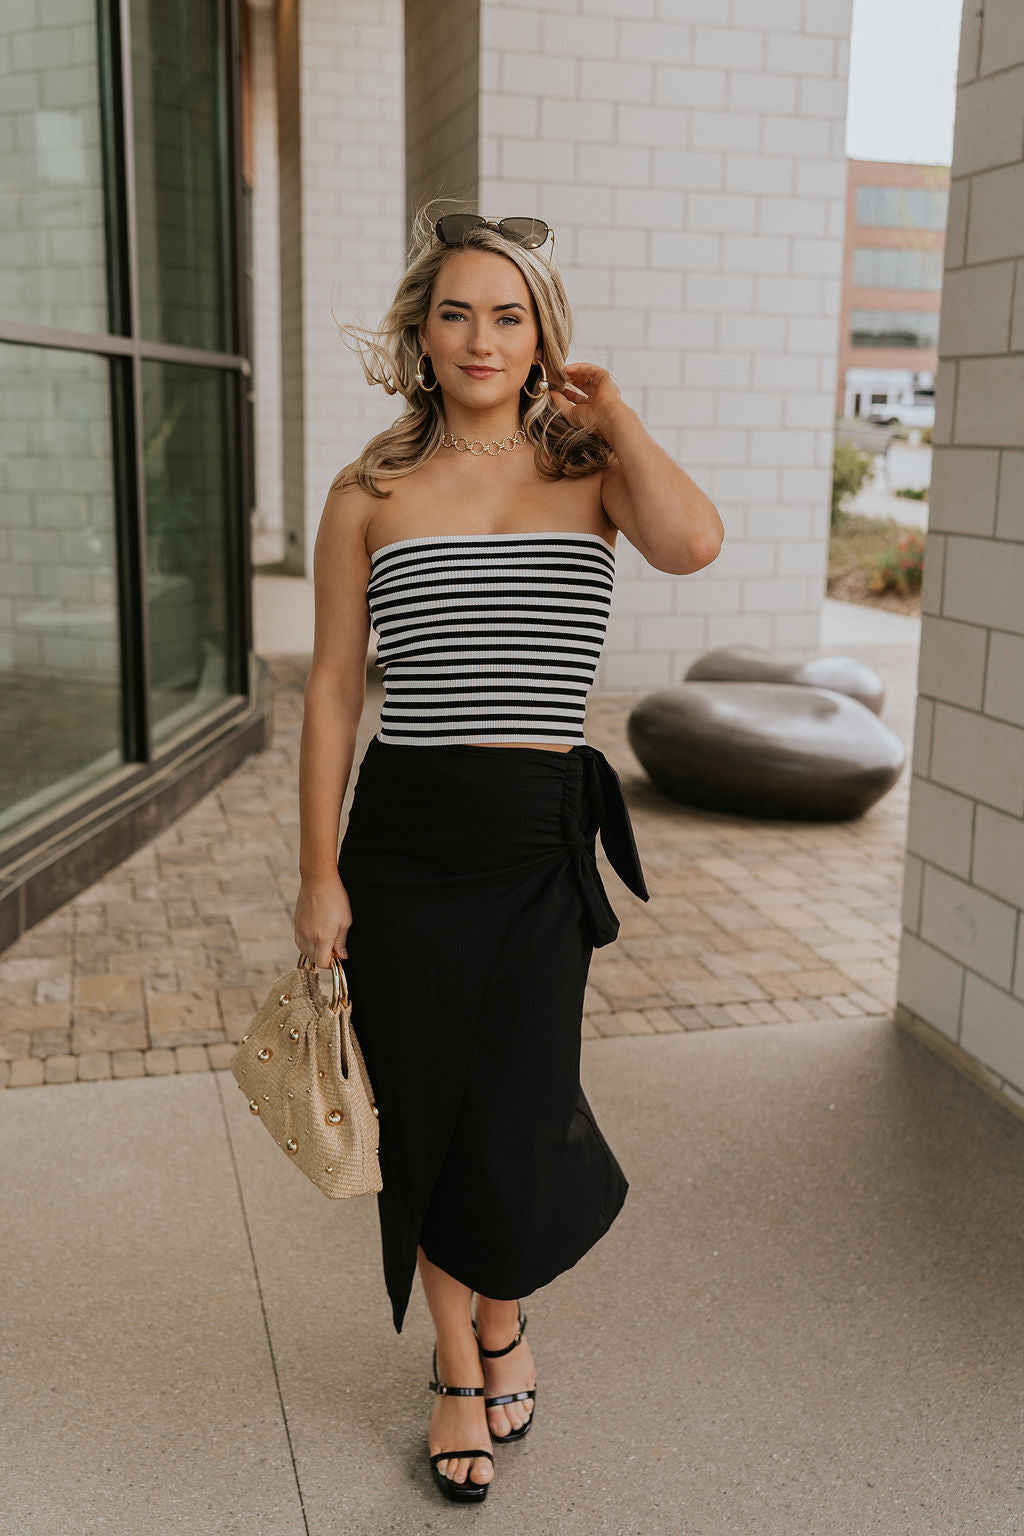 Full body front view of female model wearing the Londyn White & Black Striped Tube Top that has horizontal white and black stripes and a straight strapless neckline. Worn with black skirt.